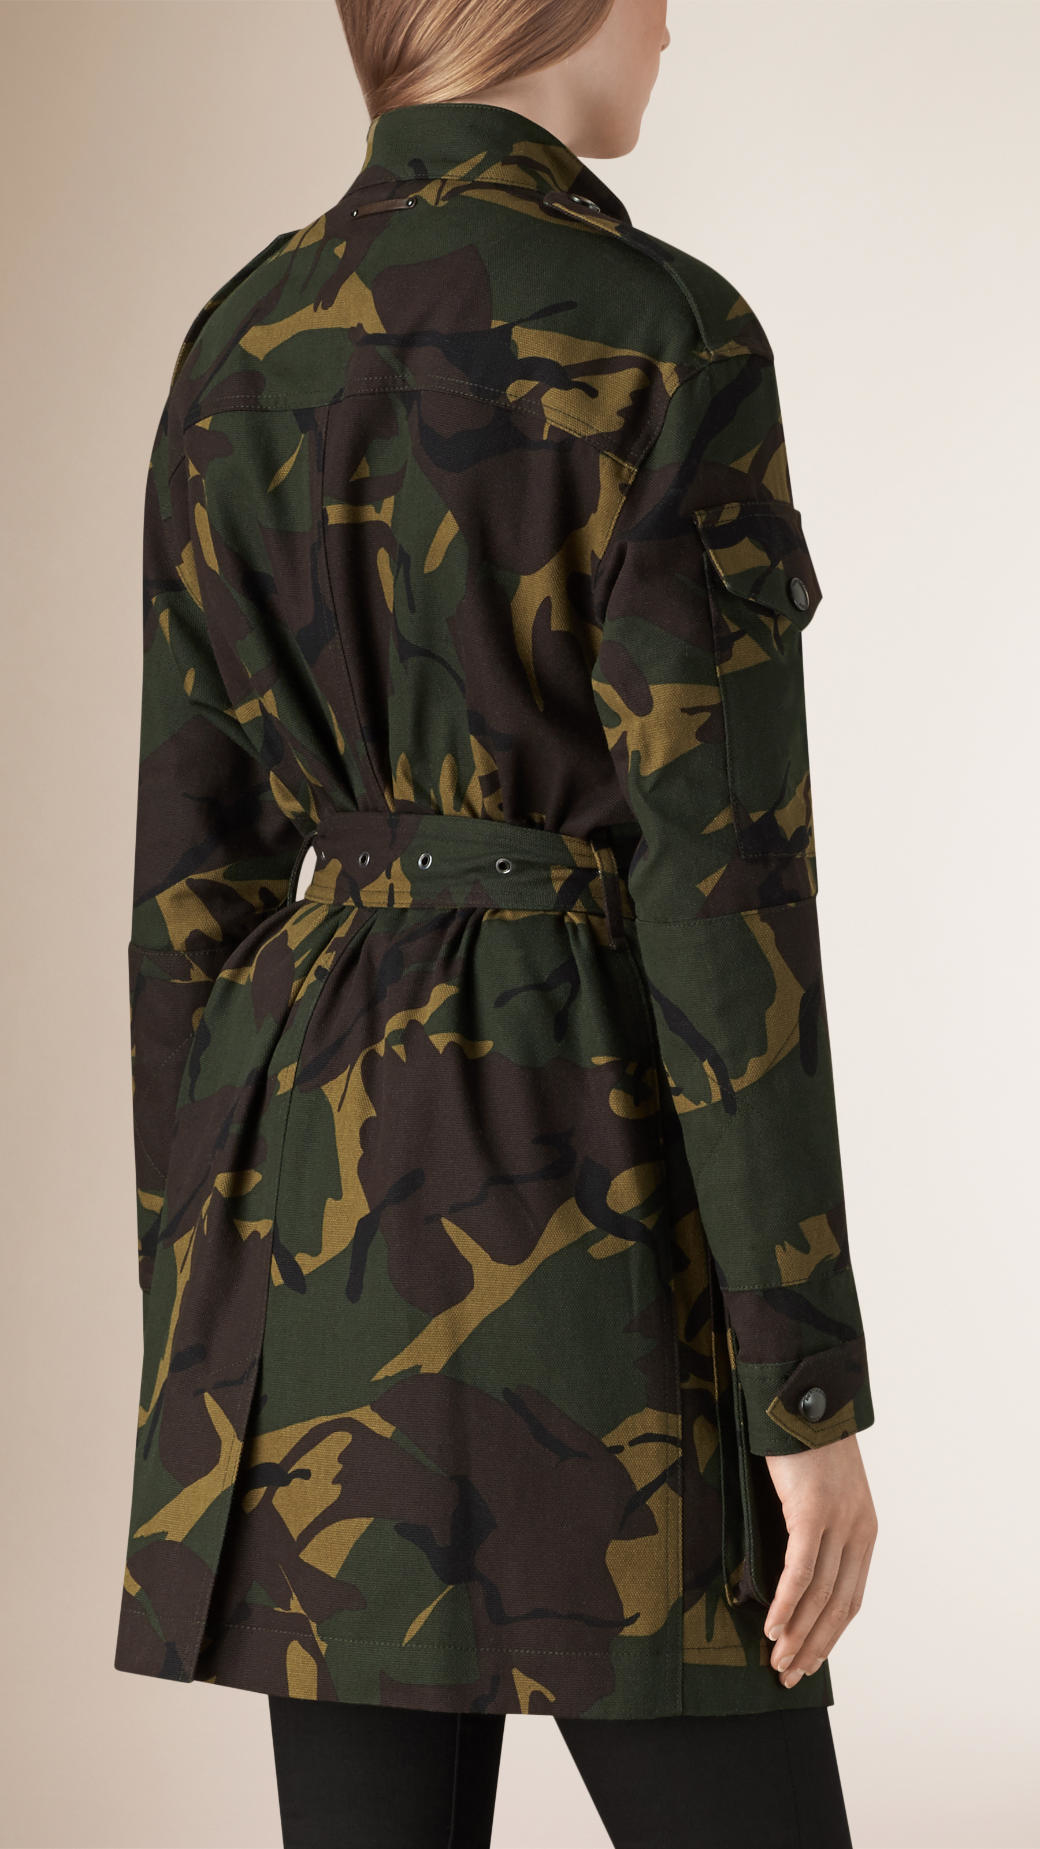 Lyst - Burberry Camouflage Print Cotton Field Jacket in Brown